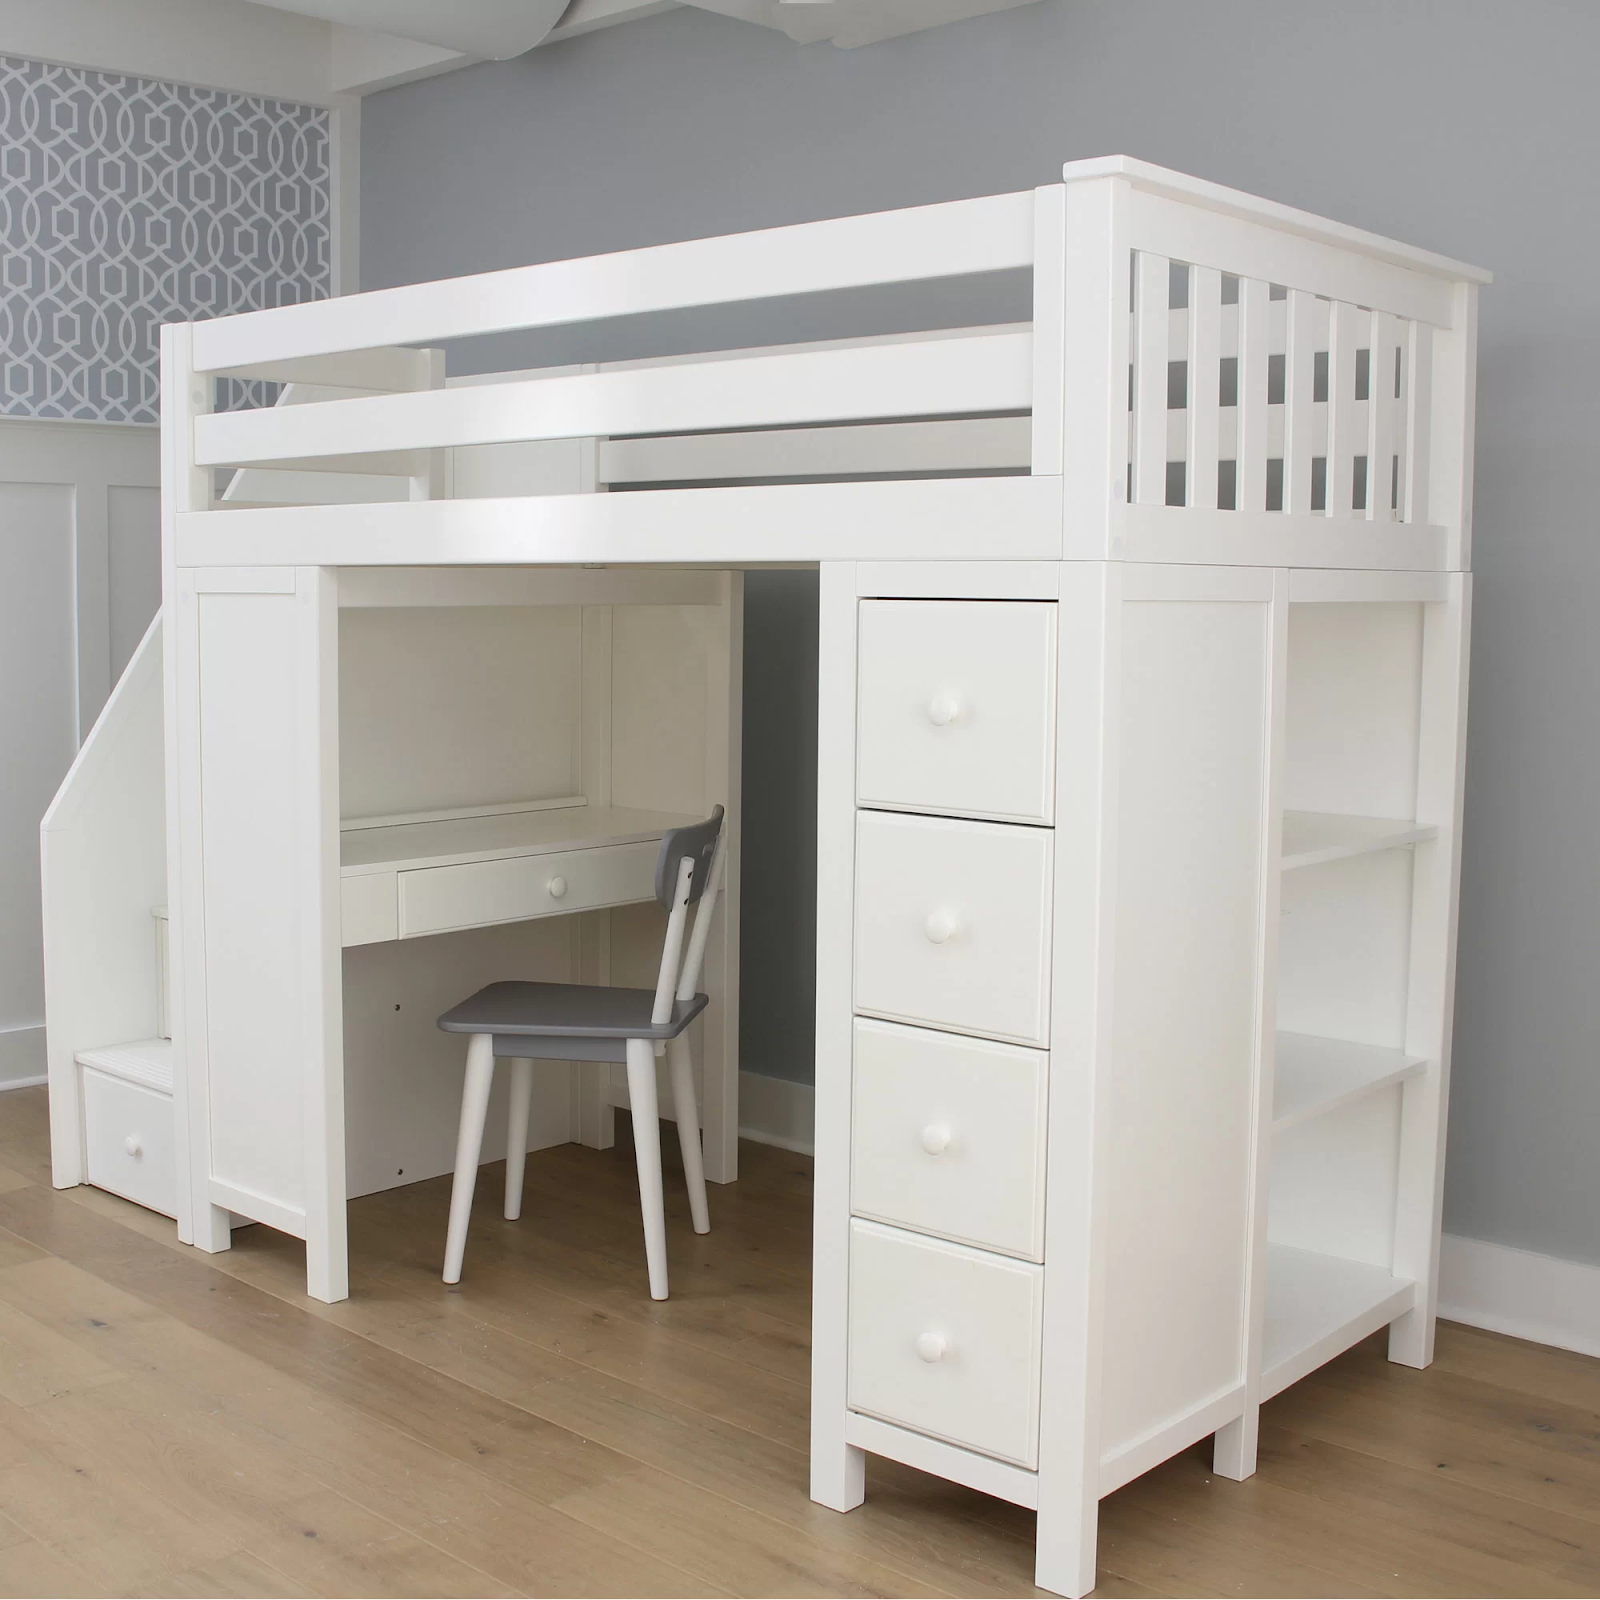 Space Below Your Loft Bed, Loft Beds With Storage And Desk